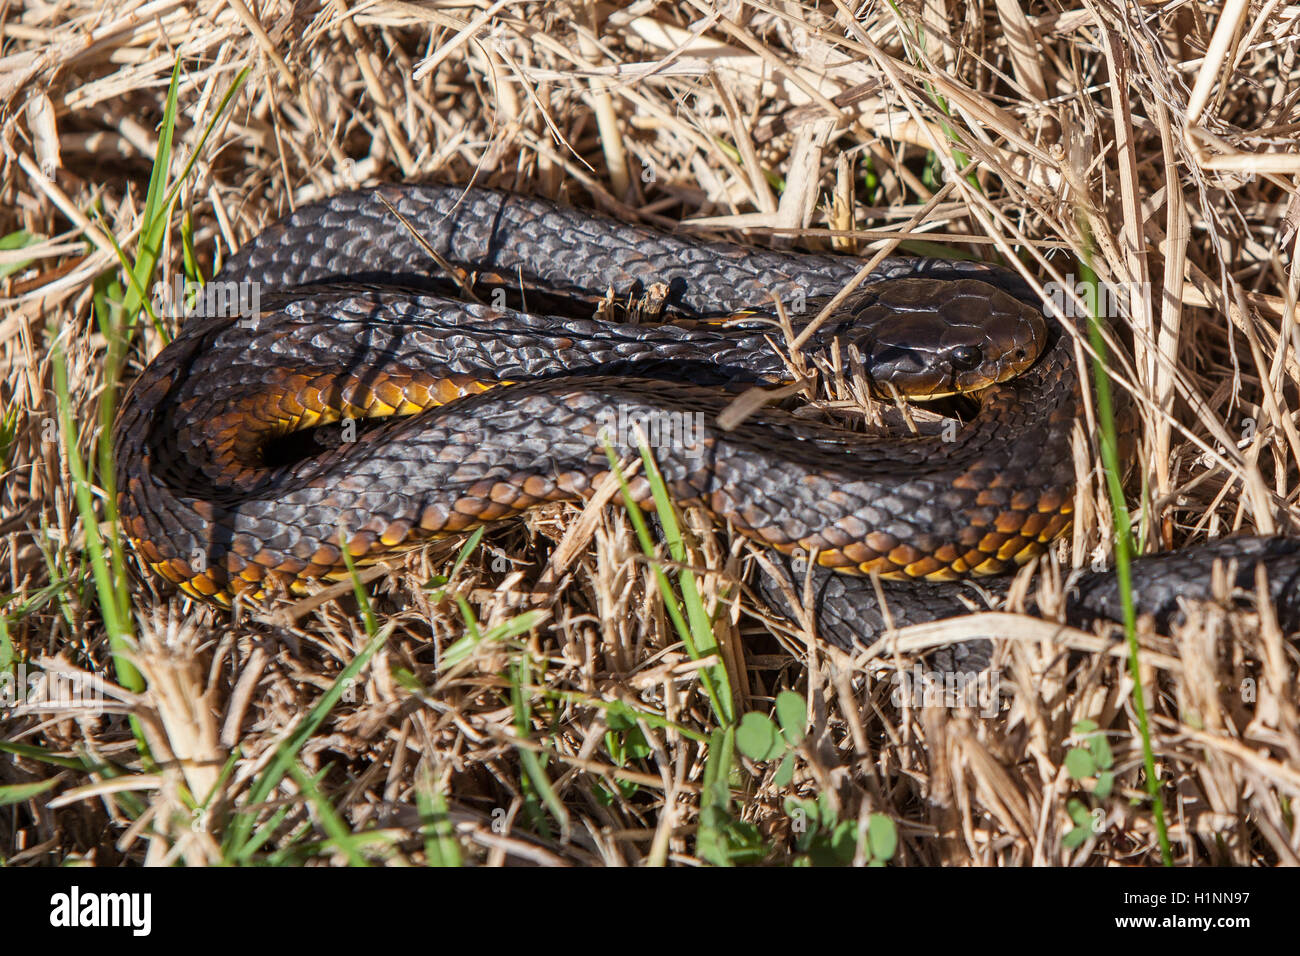 Tiger snake Notechis scutatus coiled in grass Stock Photo